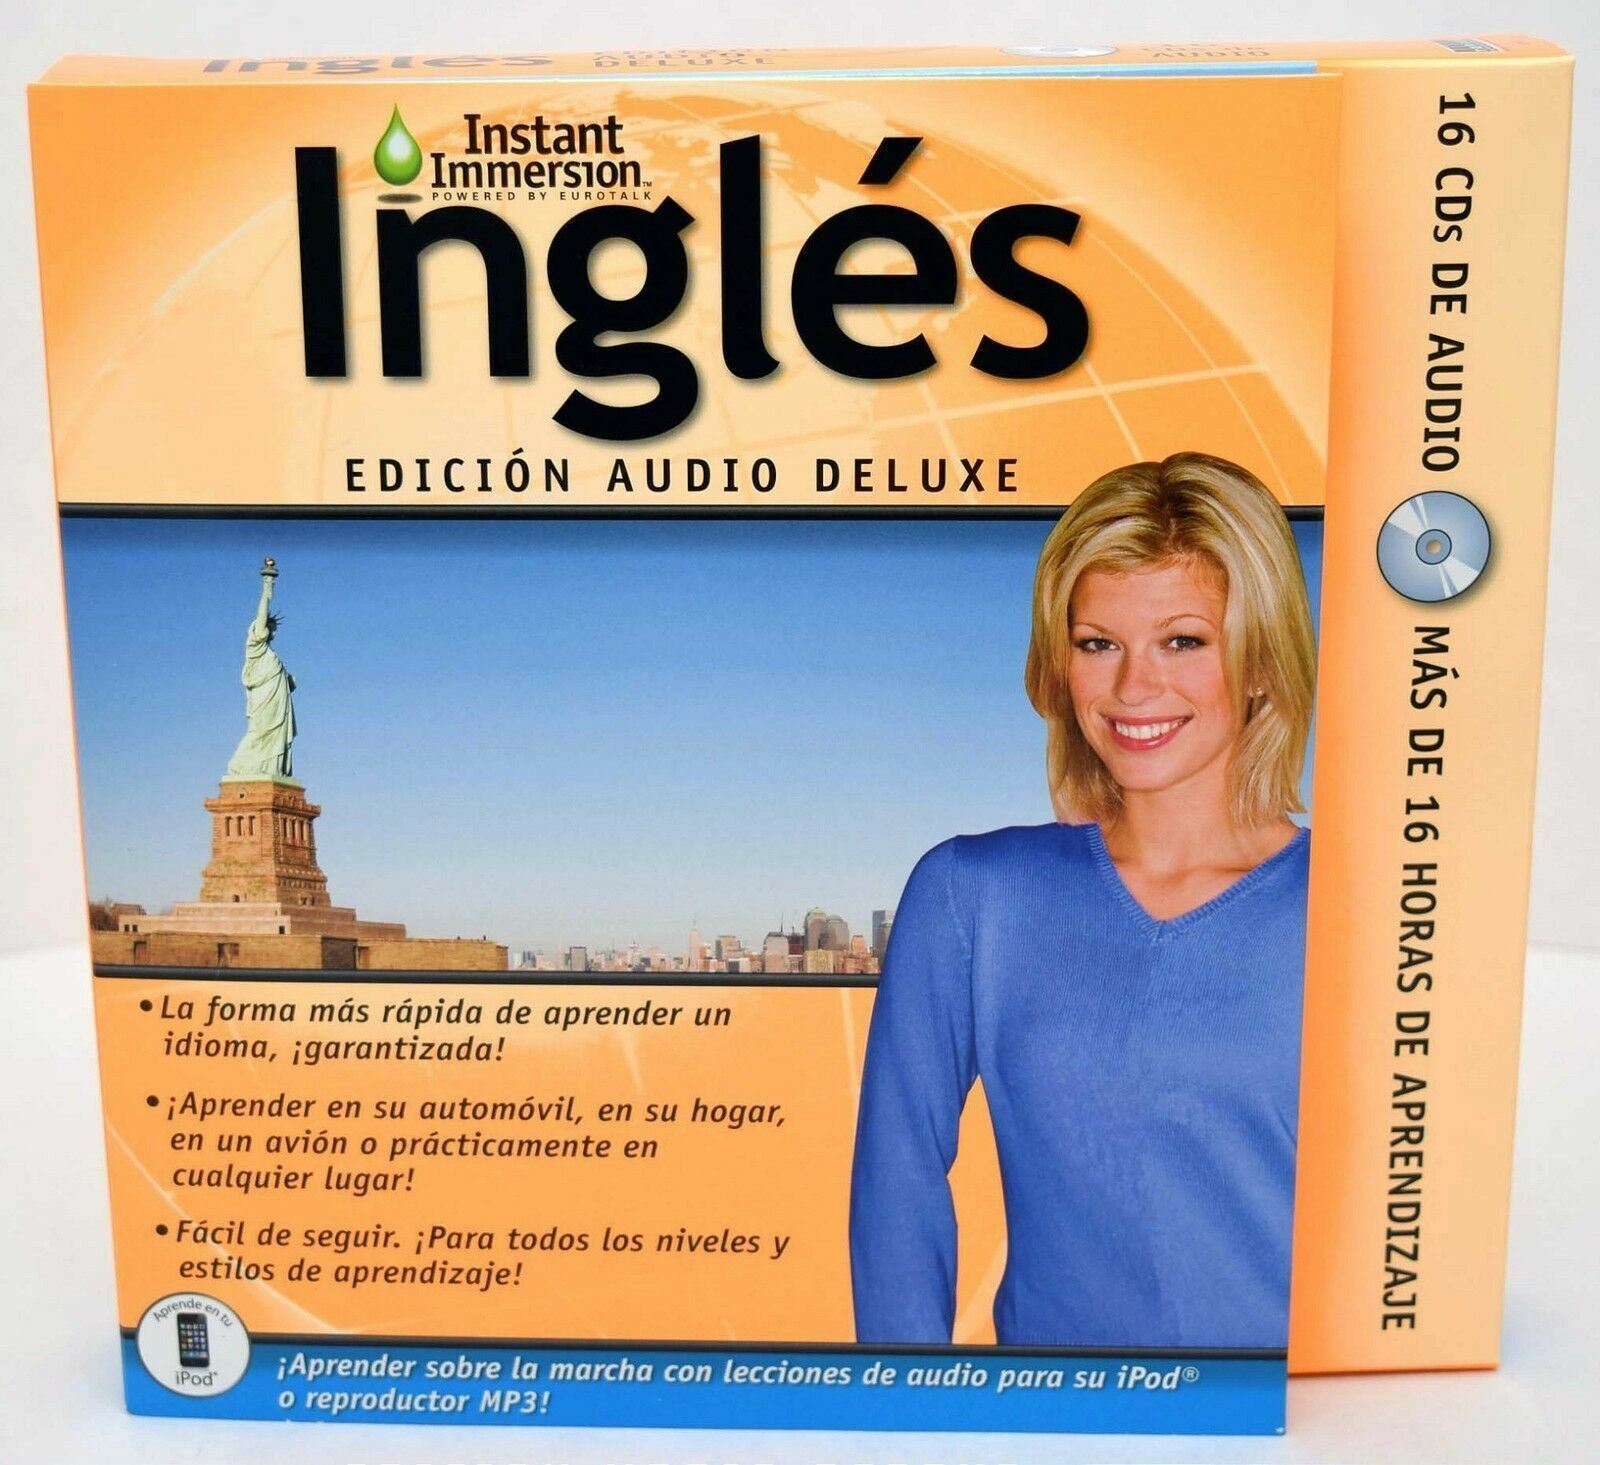 NEW Instant Immersion English Deluxe Edition Audio 16-CD-Rom Ingles Edition v2.0